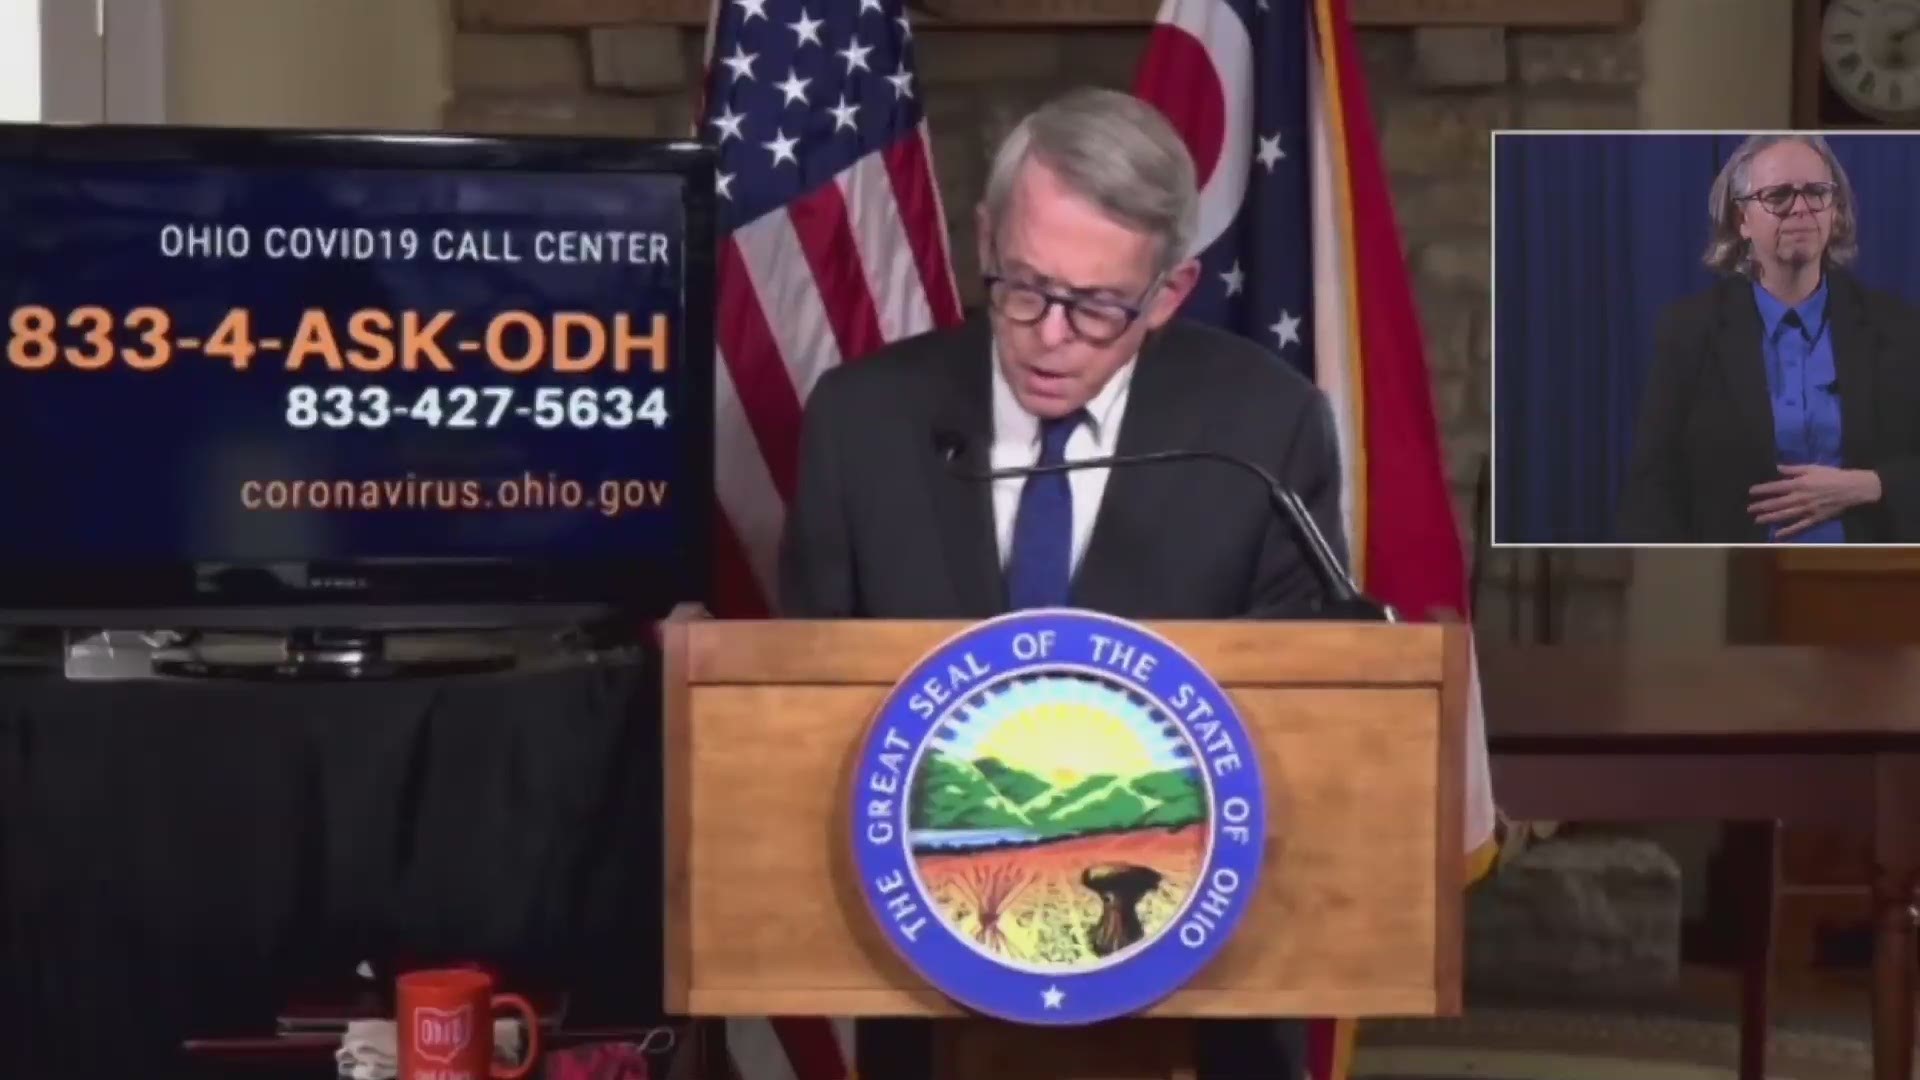 Ohio Governor Mike DeWine revealed on Monday that the still will begin adding results from antigen testing to its reported coronavirus numbers.